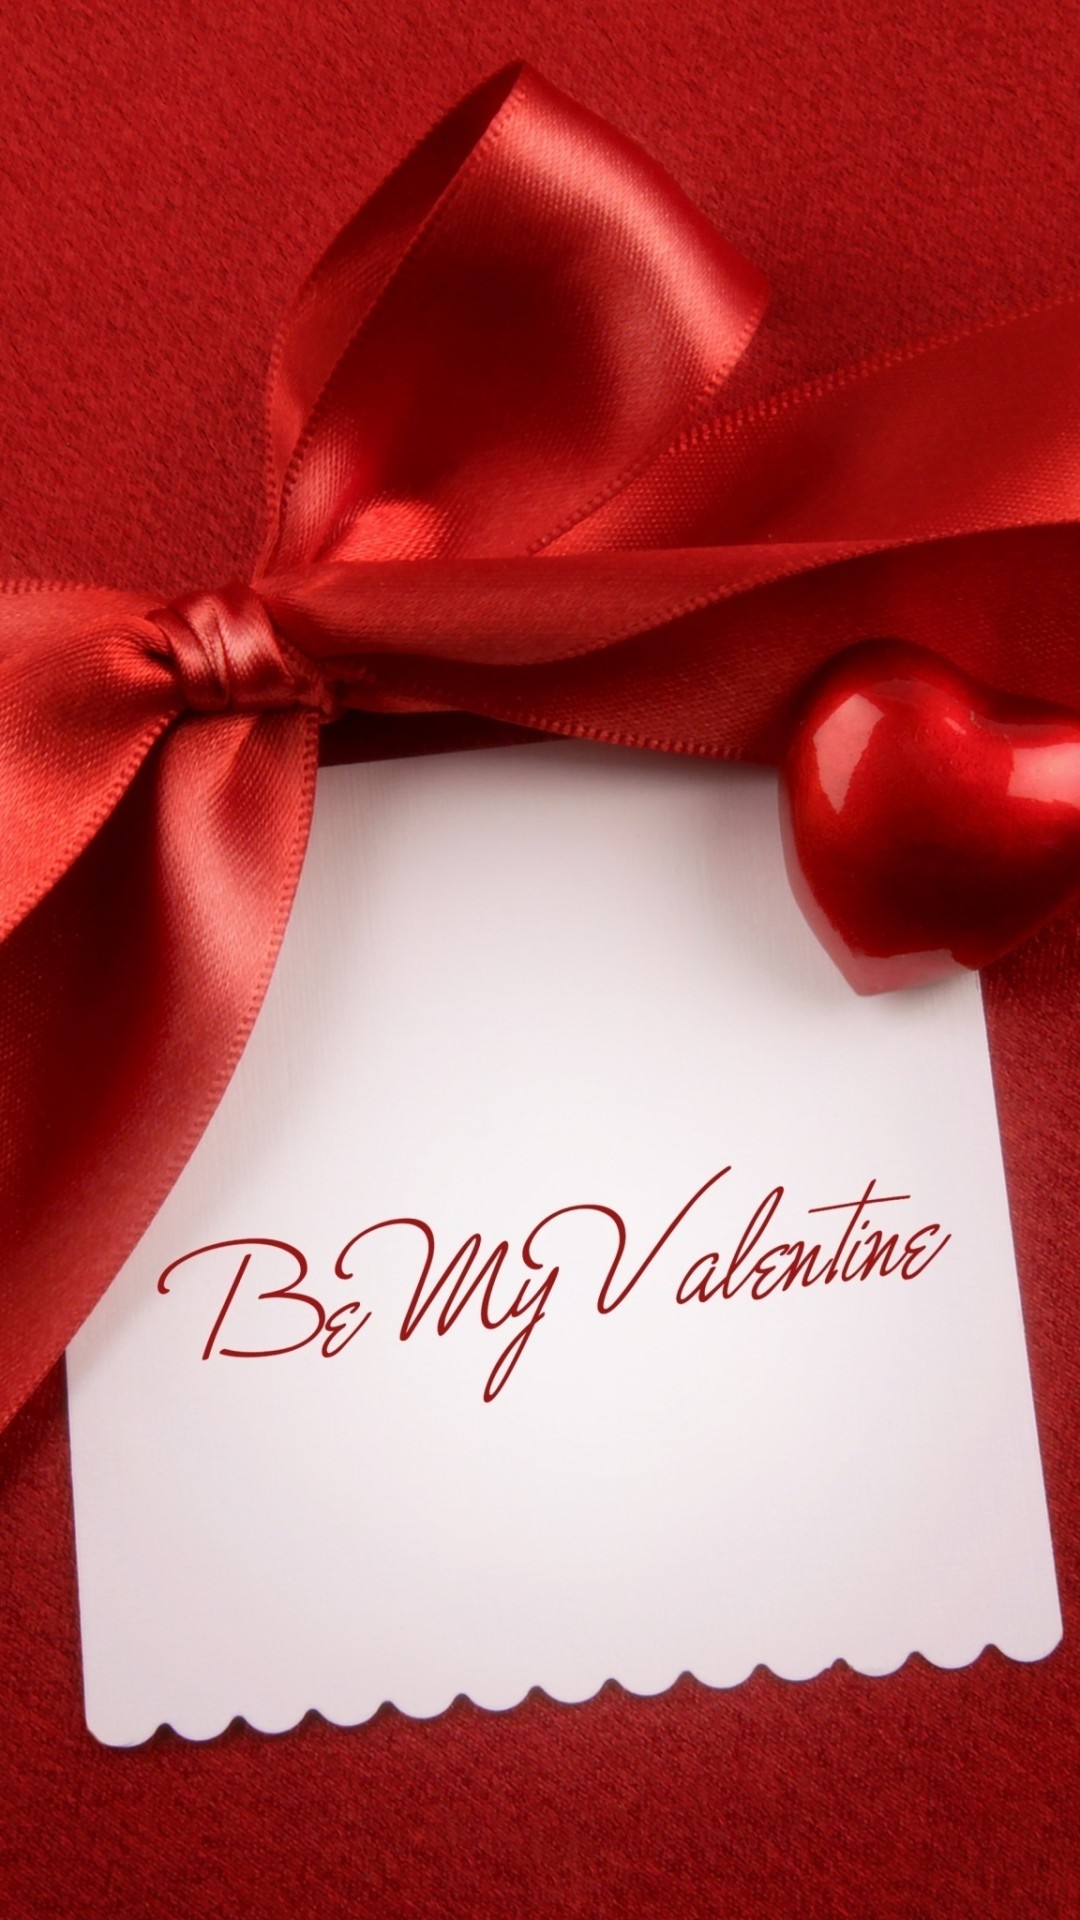 1080x1920 Be My Valentine Note iPhone 6 Plus HD Wallpaper